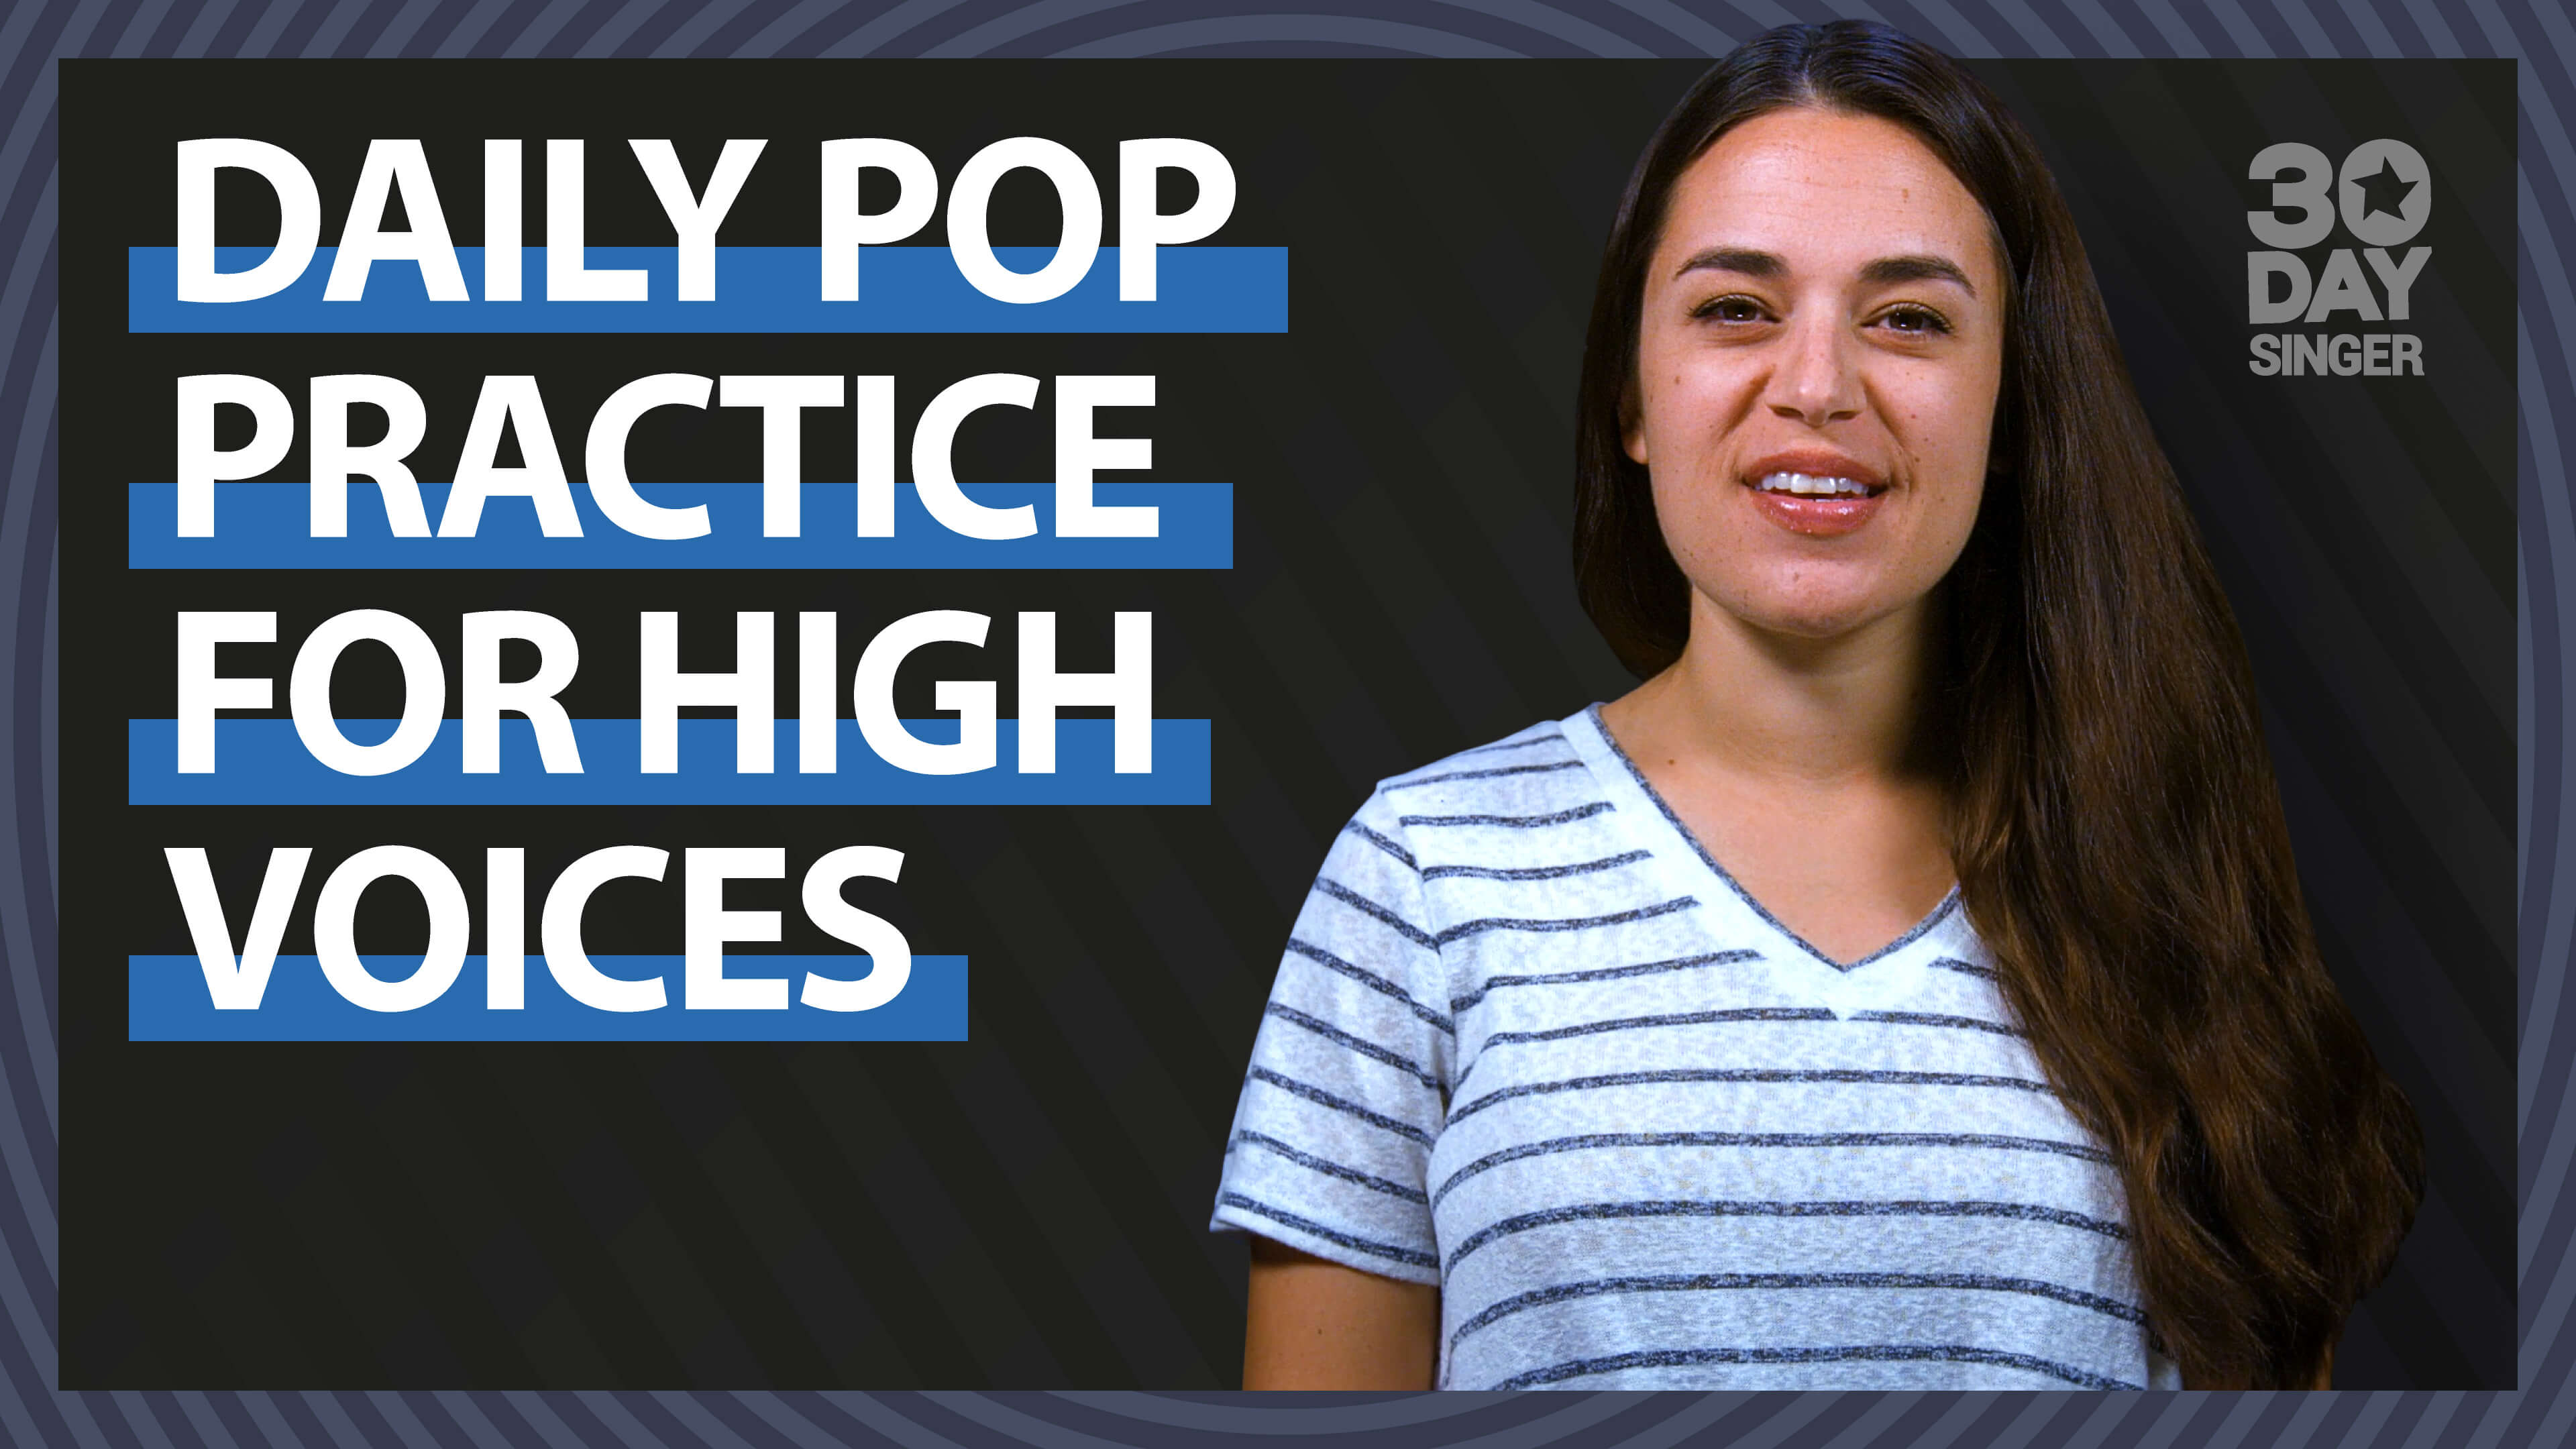 Daily Pop Practice For High Voices